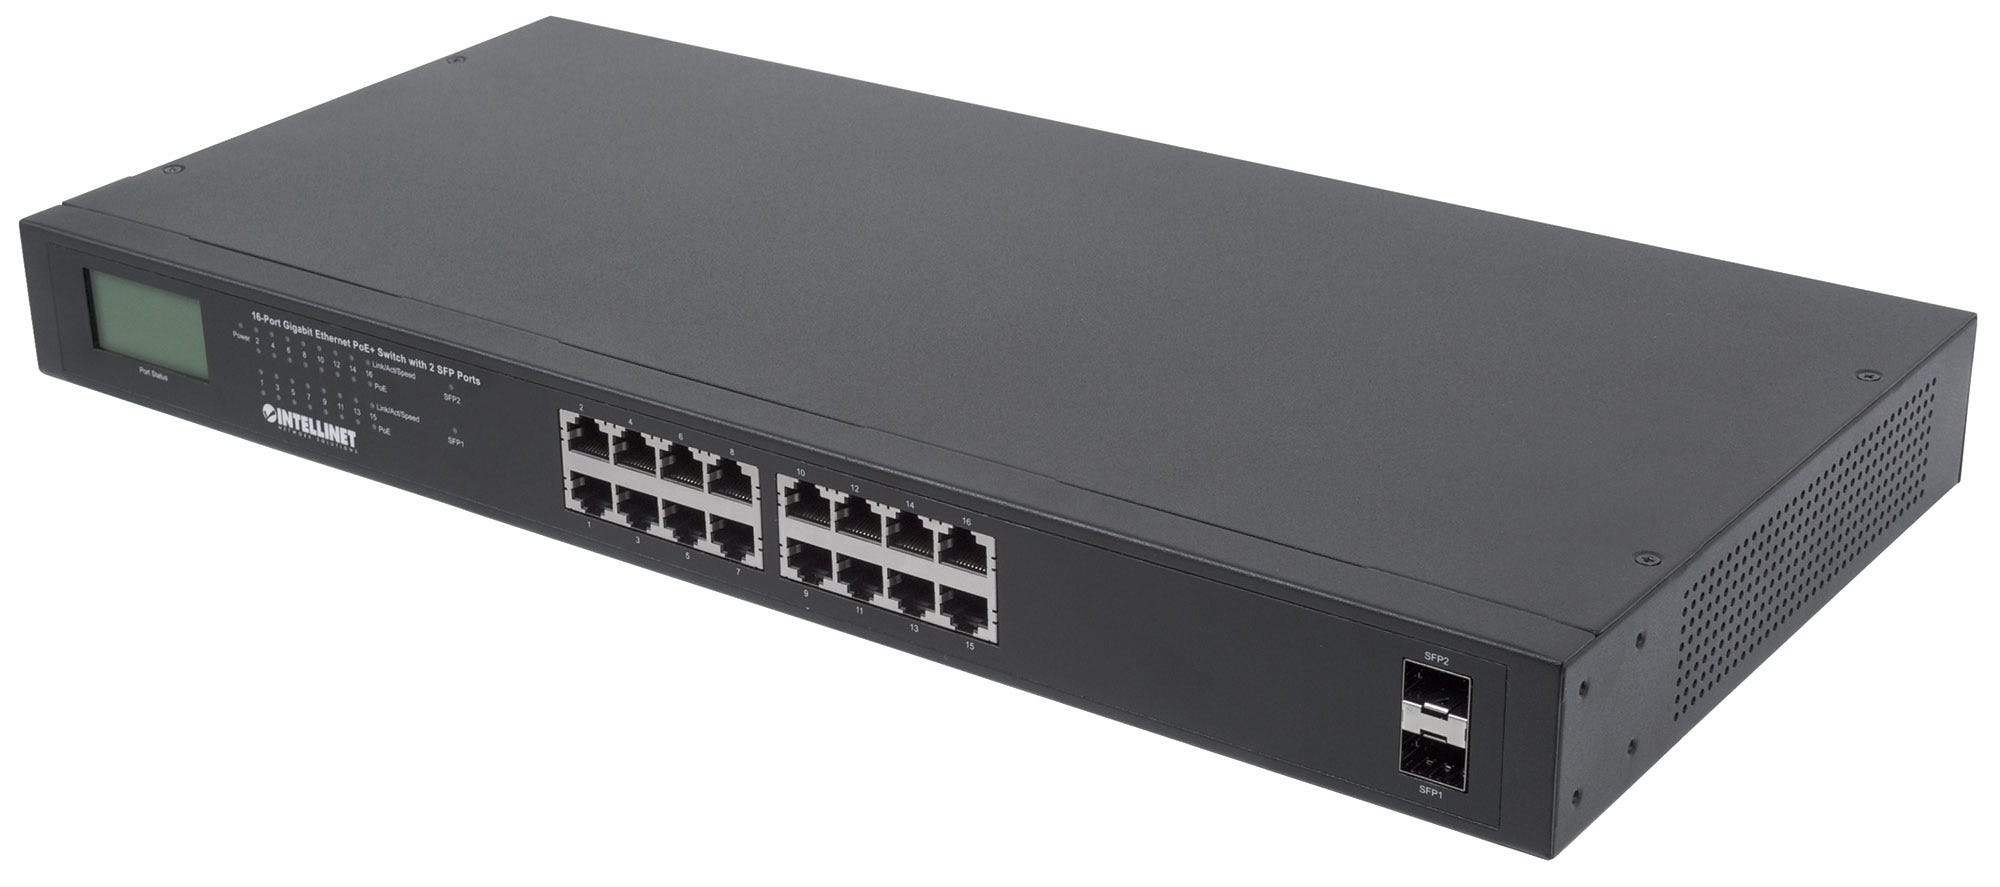 Intellinet 16-Port Gigabit Ethernet PoE+ Switch with 2 SFP Ports, LCD Display, IEEE 802.3at/af Power over Ethernet (PoE+/PoE)